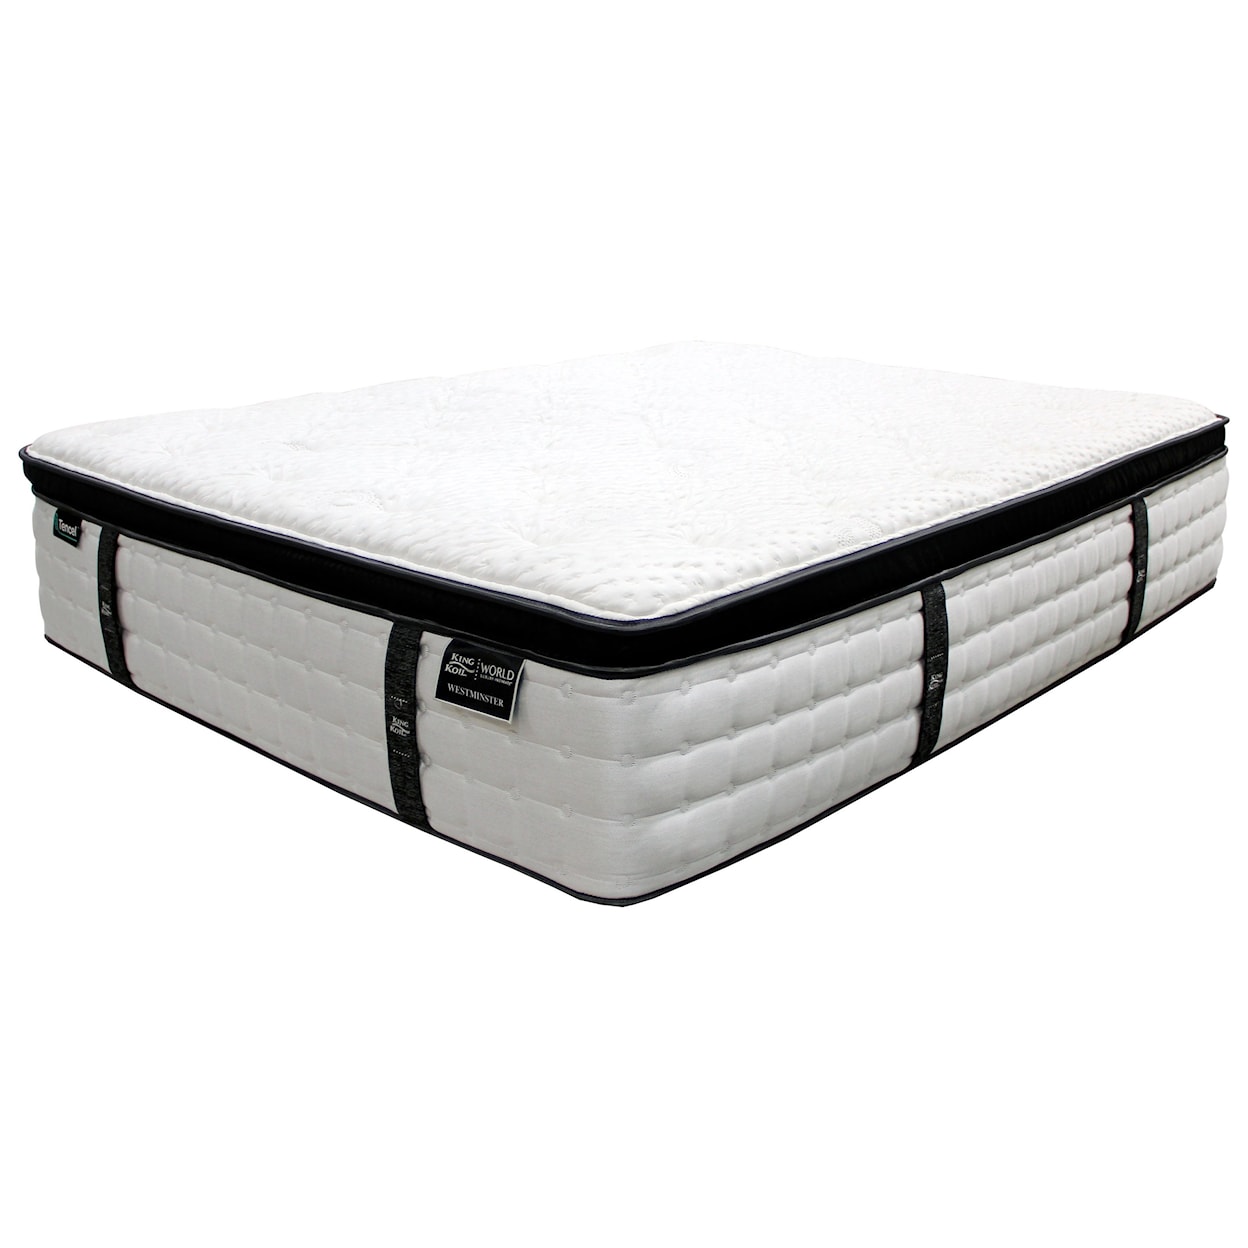 King Koil Westminster CET Full Pocketed Coil Mattress